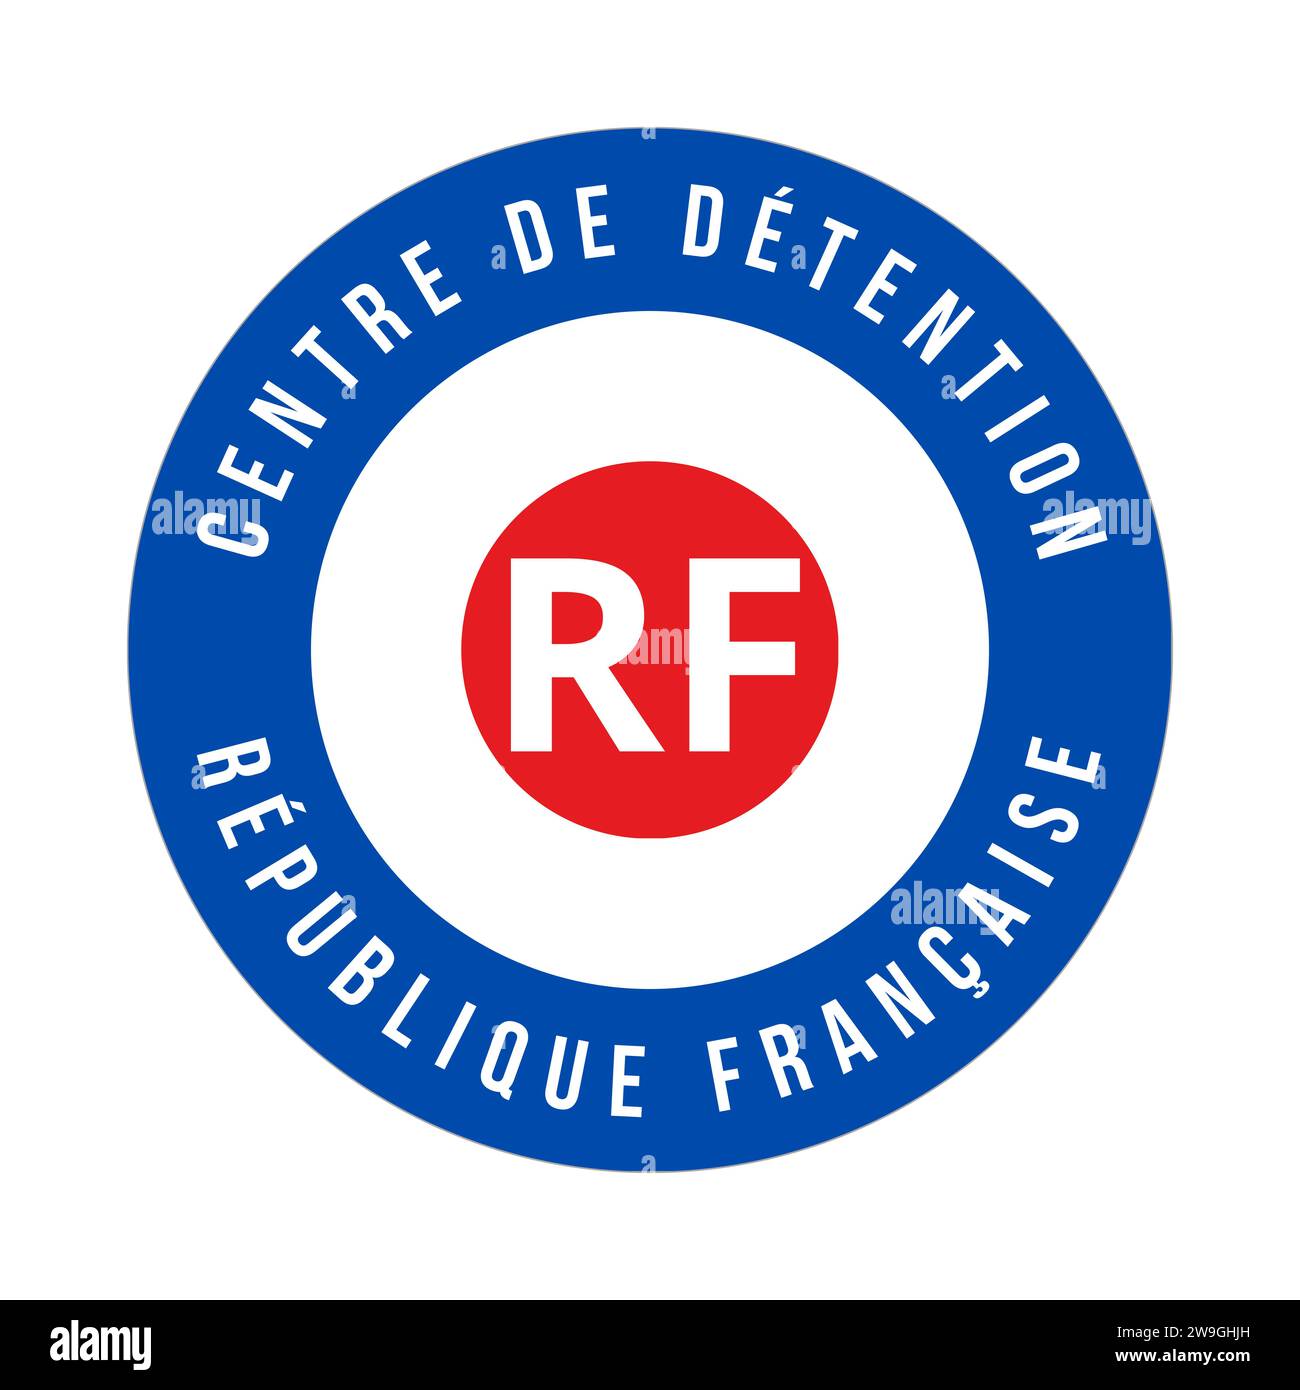 Detention center symbol icon called centre de detention in French language Stock Photo